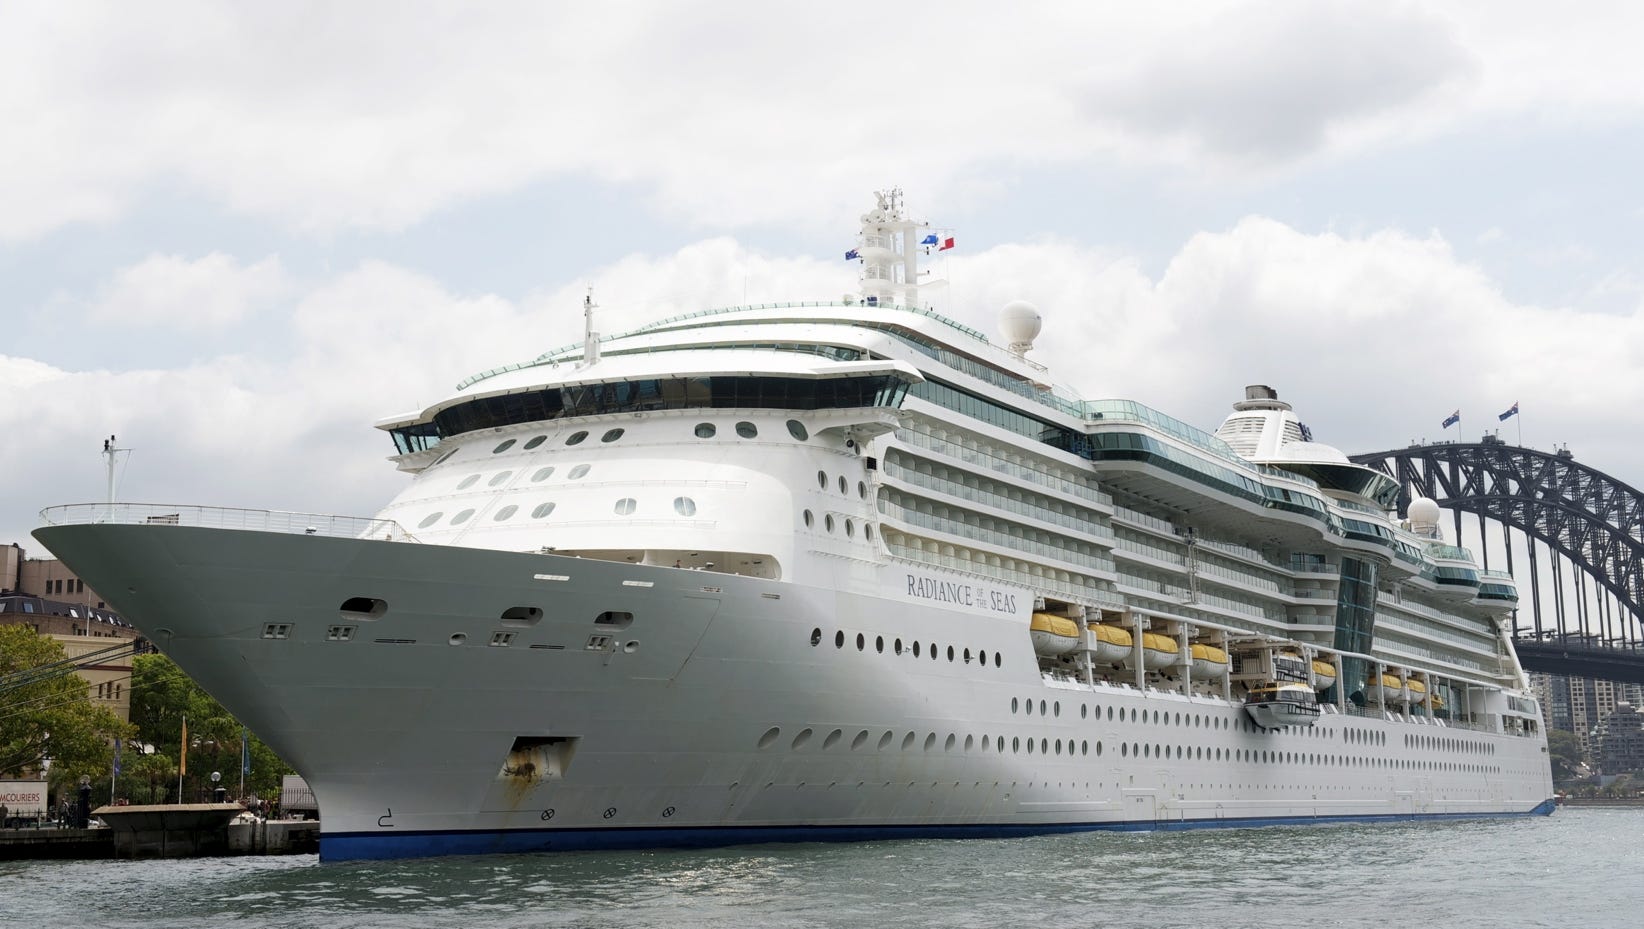 Cruise ship review: Royal Caribbean's Radiance of the Seas